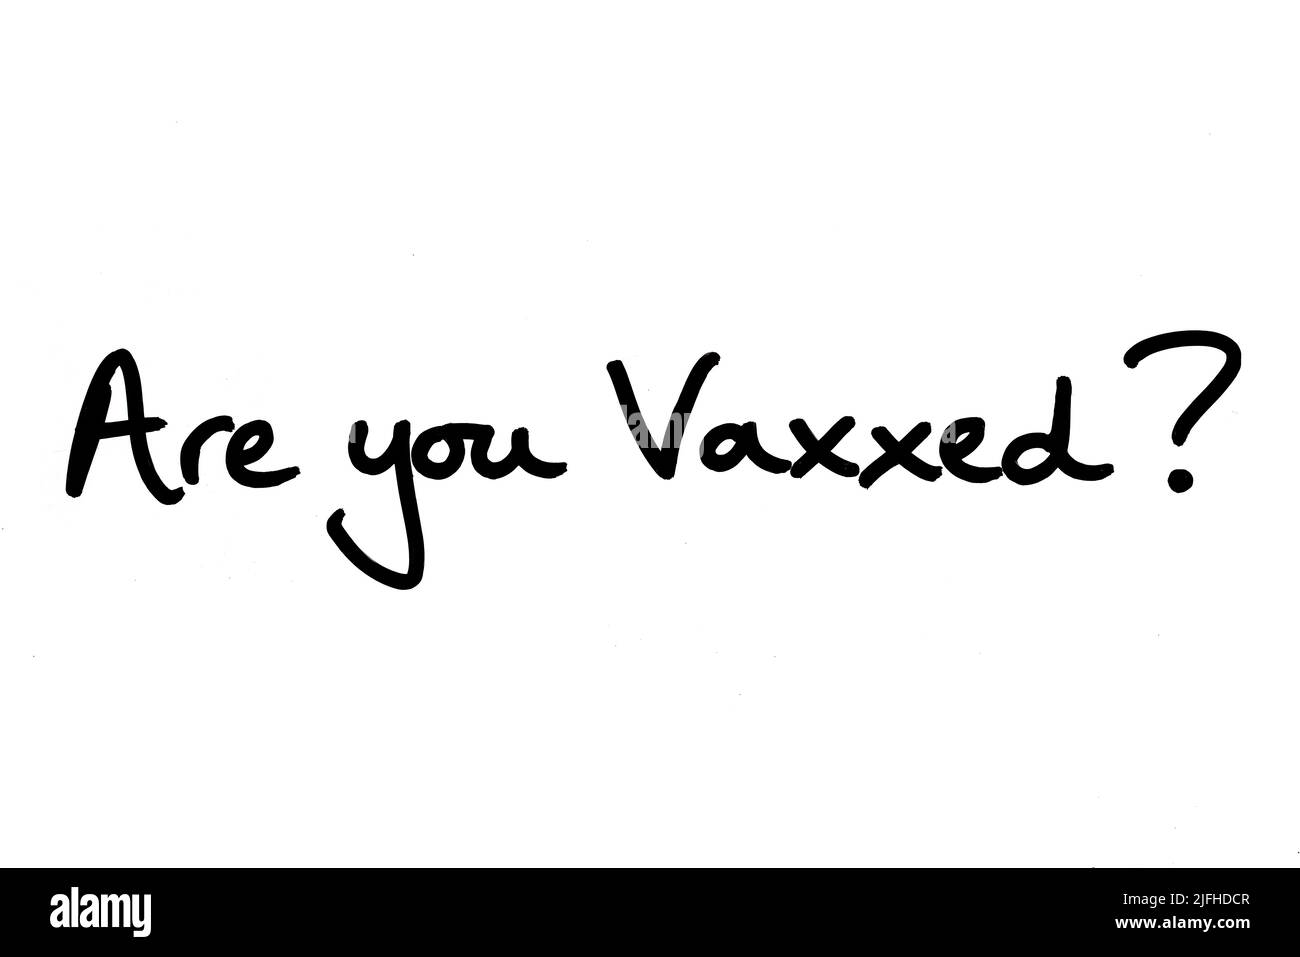 Are you Vaxxed? handwritten on a white background. Stock Photo